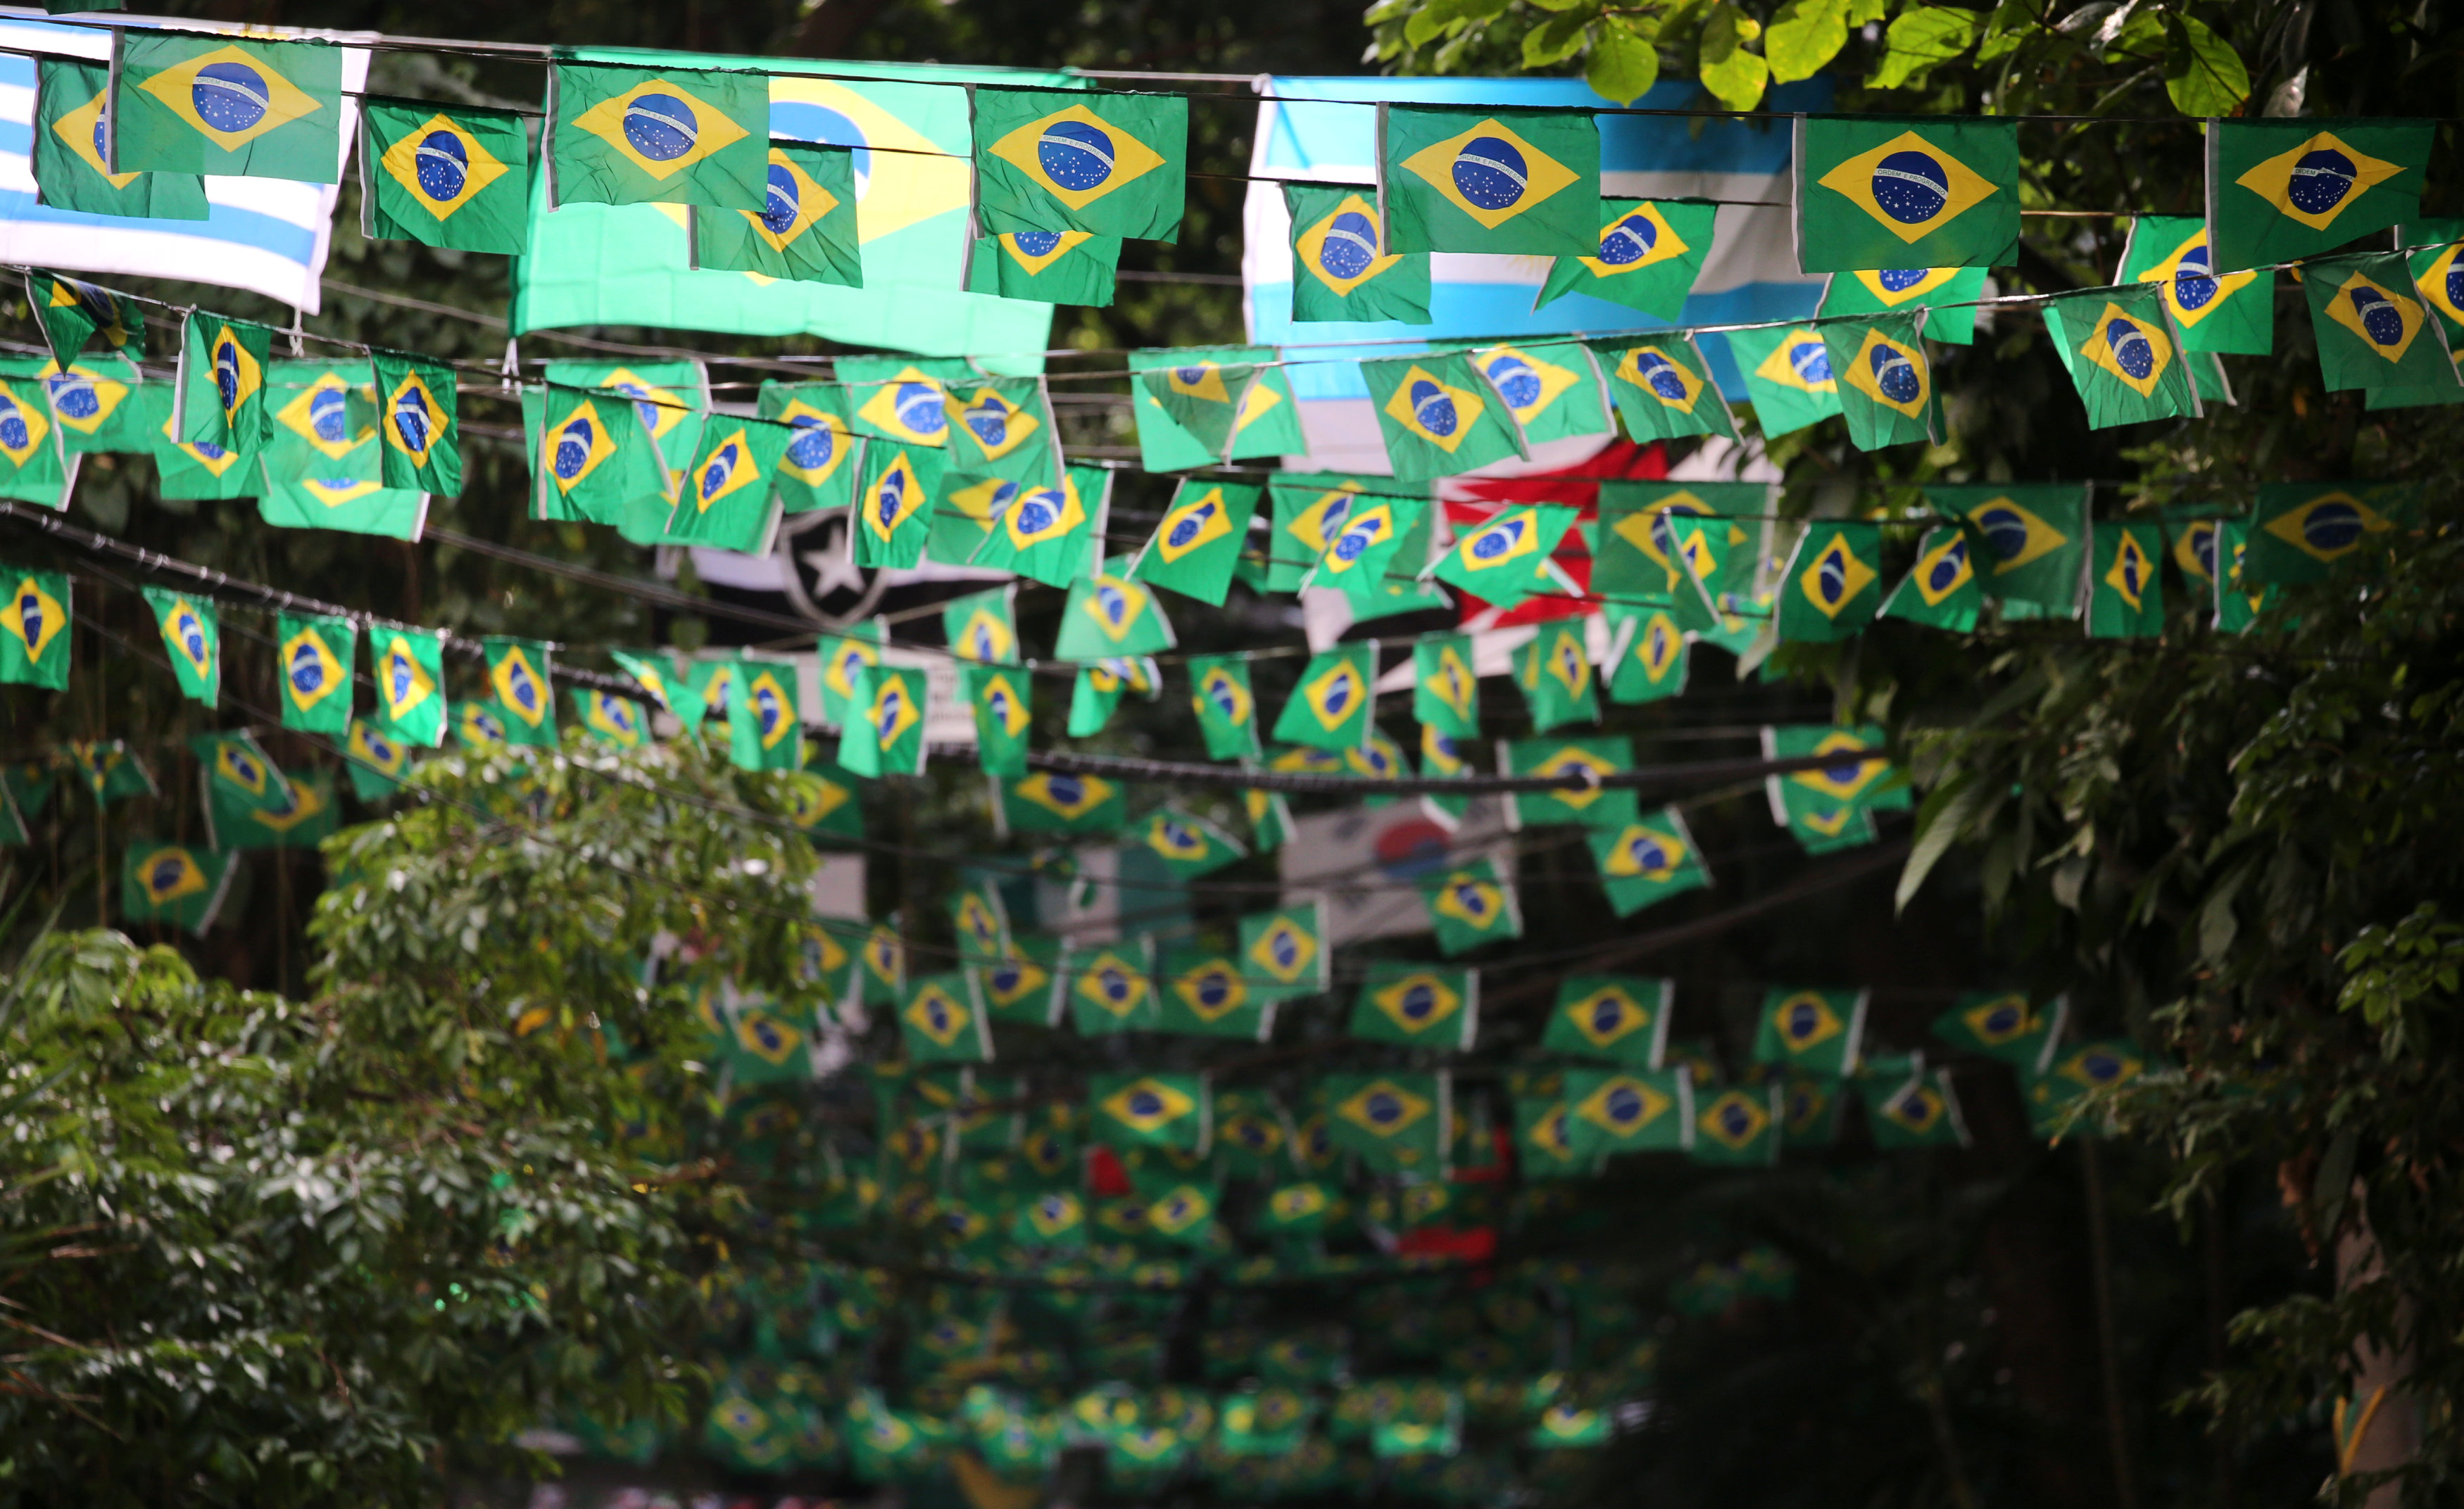 Brazilians not so football mad after all, report suggests